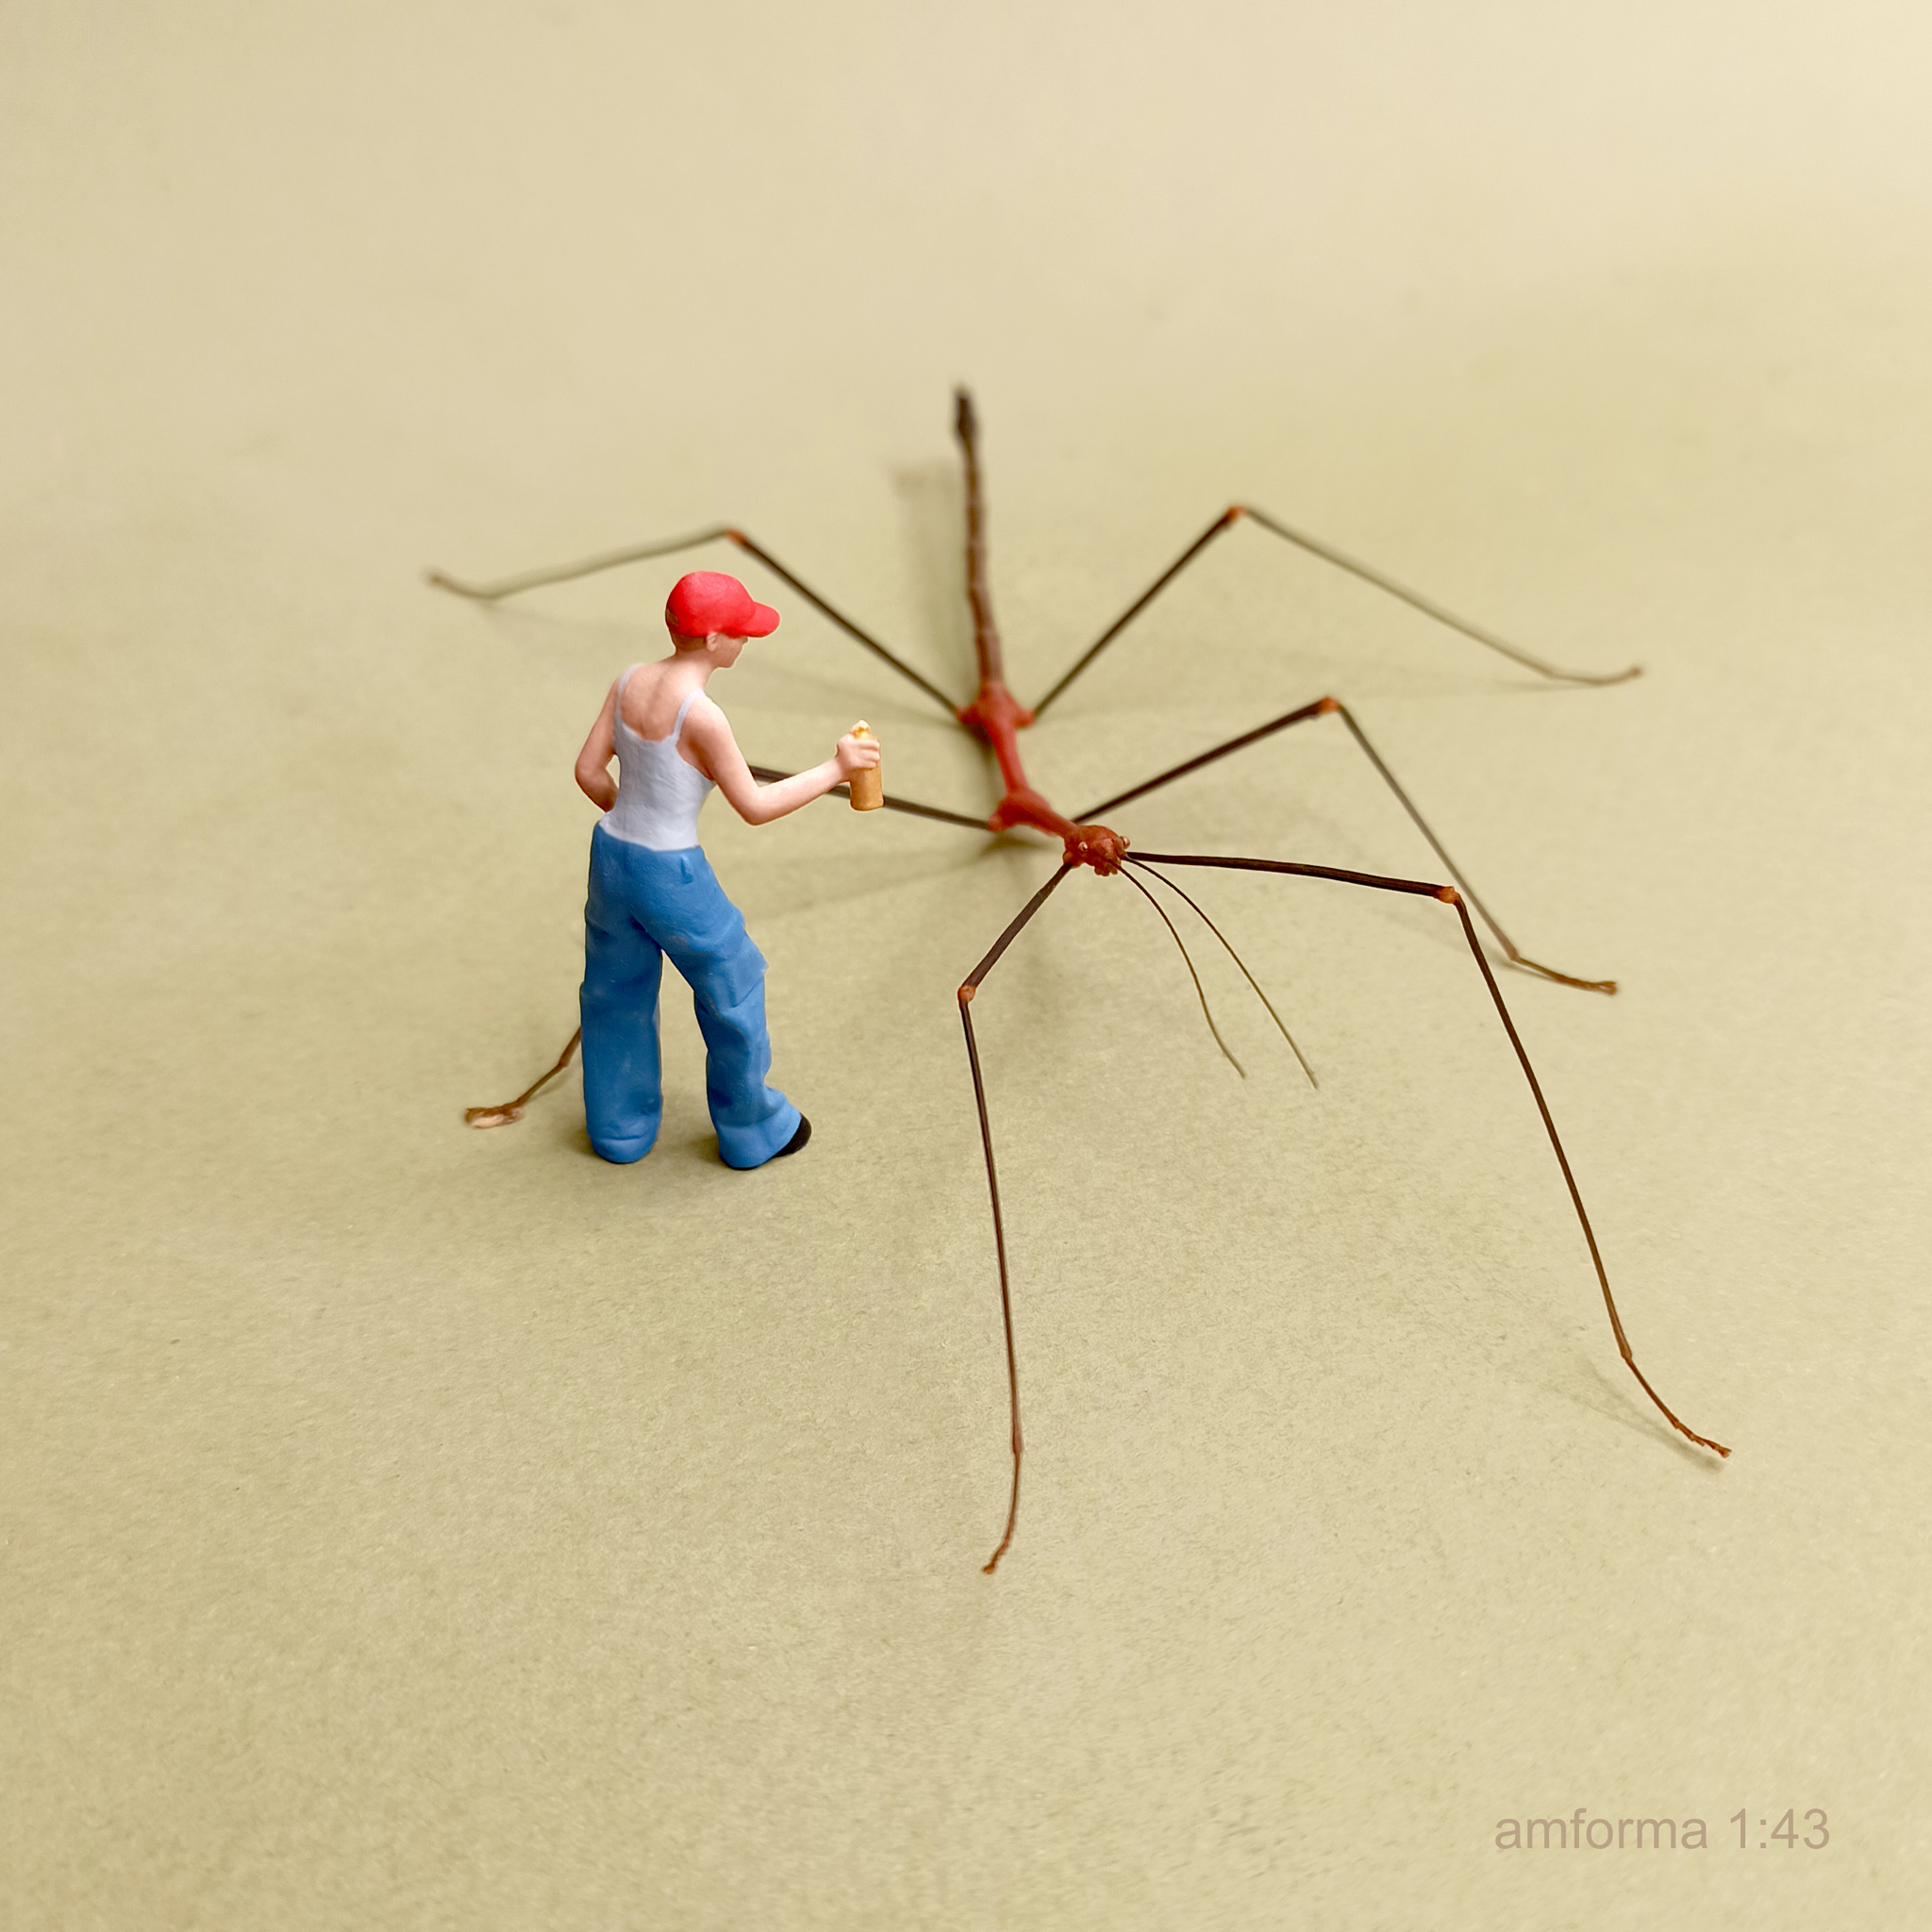 When is it too late to carry out pest control? - My, Figurines, Modeling, 3D печать, Scale model, Miniature, Painting miniatures, Stand modeling, Painting, Stick insect, Collecting, Painting, 3D modeling, Collection, Longpost, Needlework without process